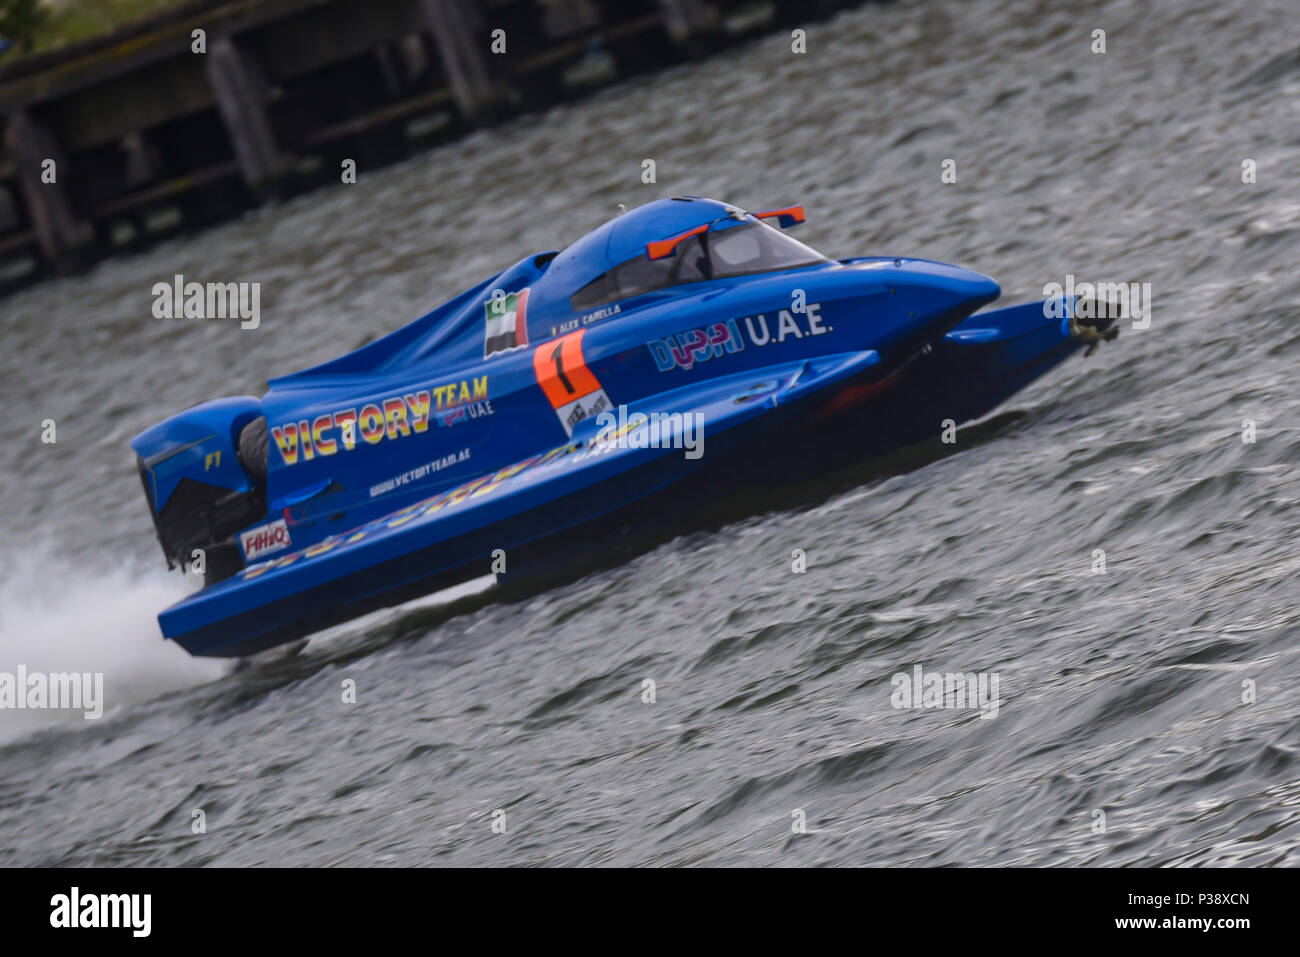 Alex Carella driving for Victory Team racing in the F1H2O Formula 1 Powerboat Grand Prix of London at Royal Victoria Dock, Docklands, Newham London, UK Stock Photo